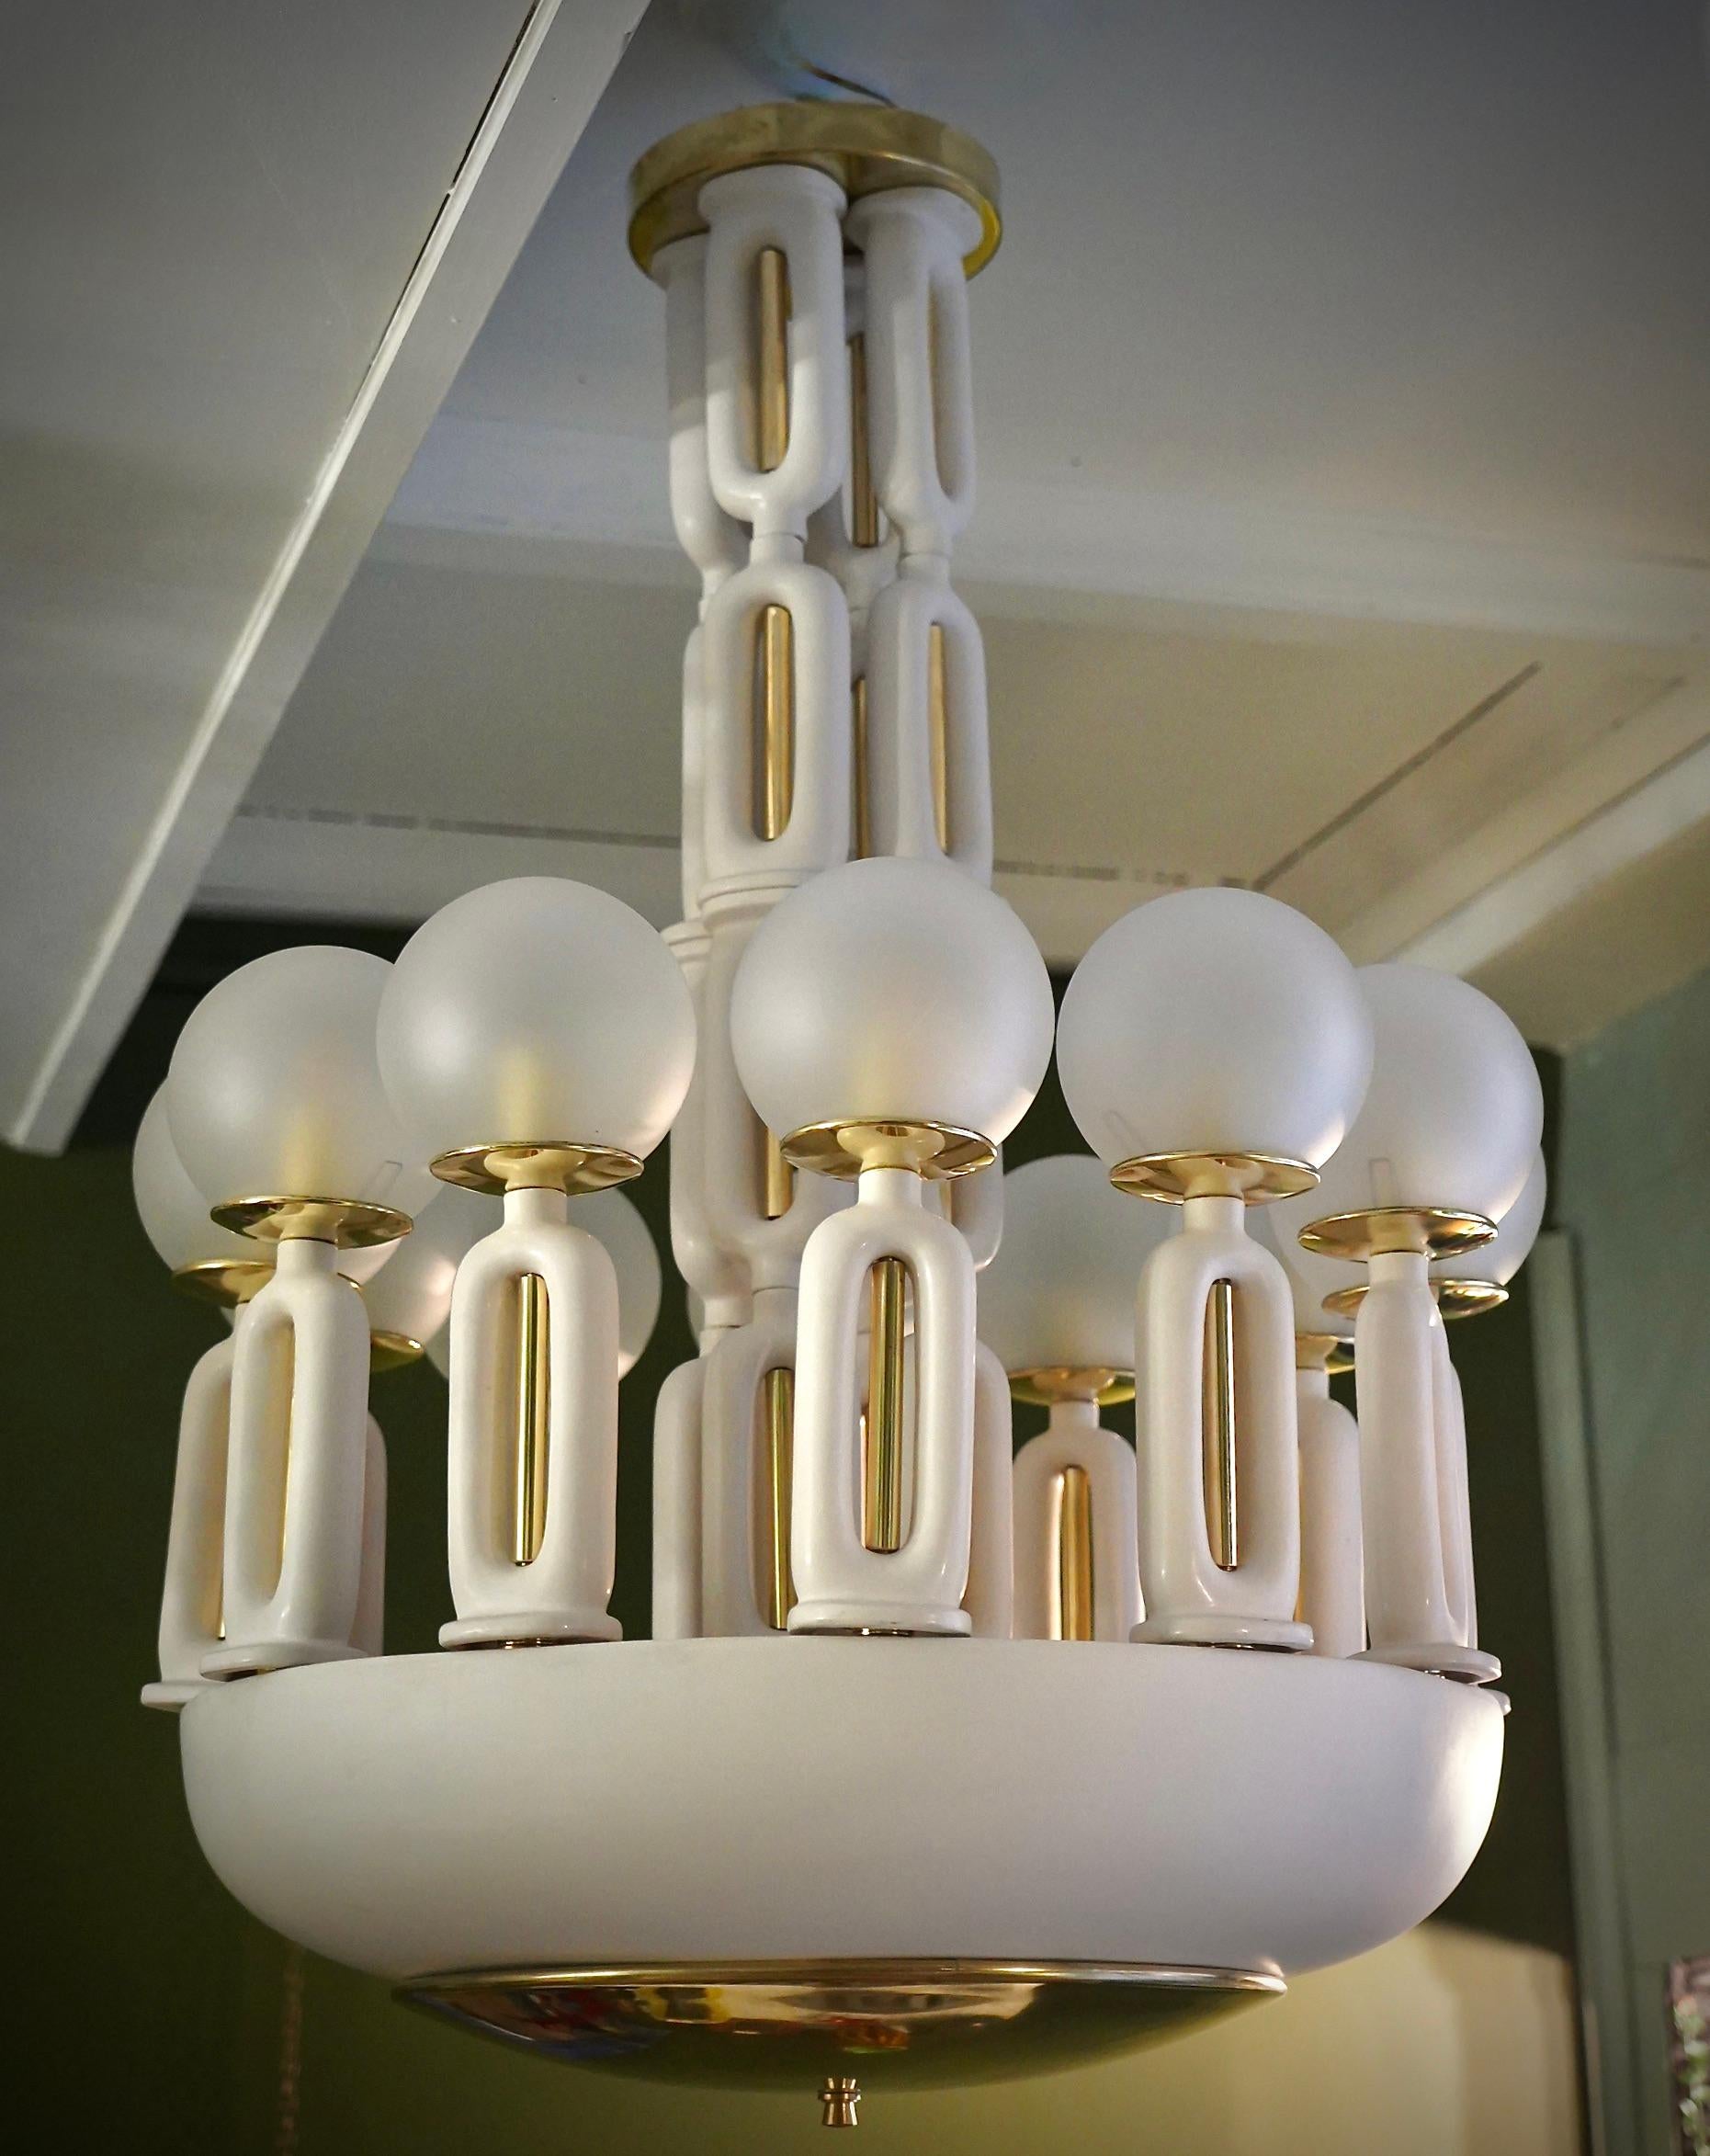 Murano Art Glass Brass and Ceramic Chandelier and Pendant, 1950 For Sale 2